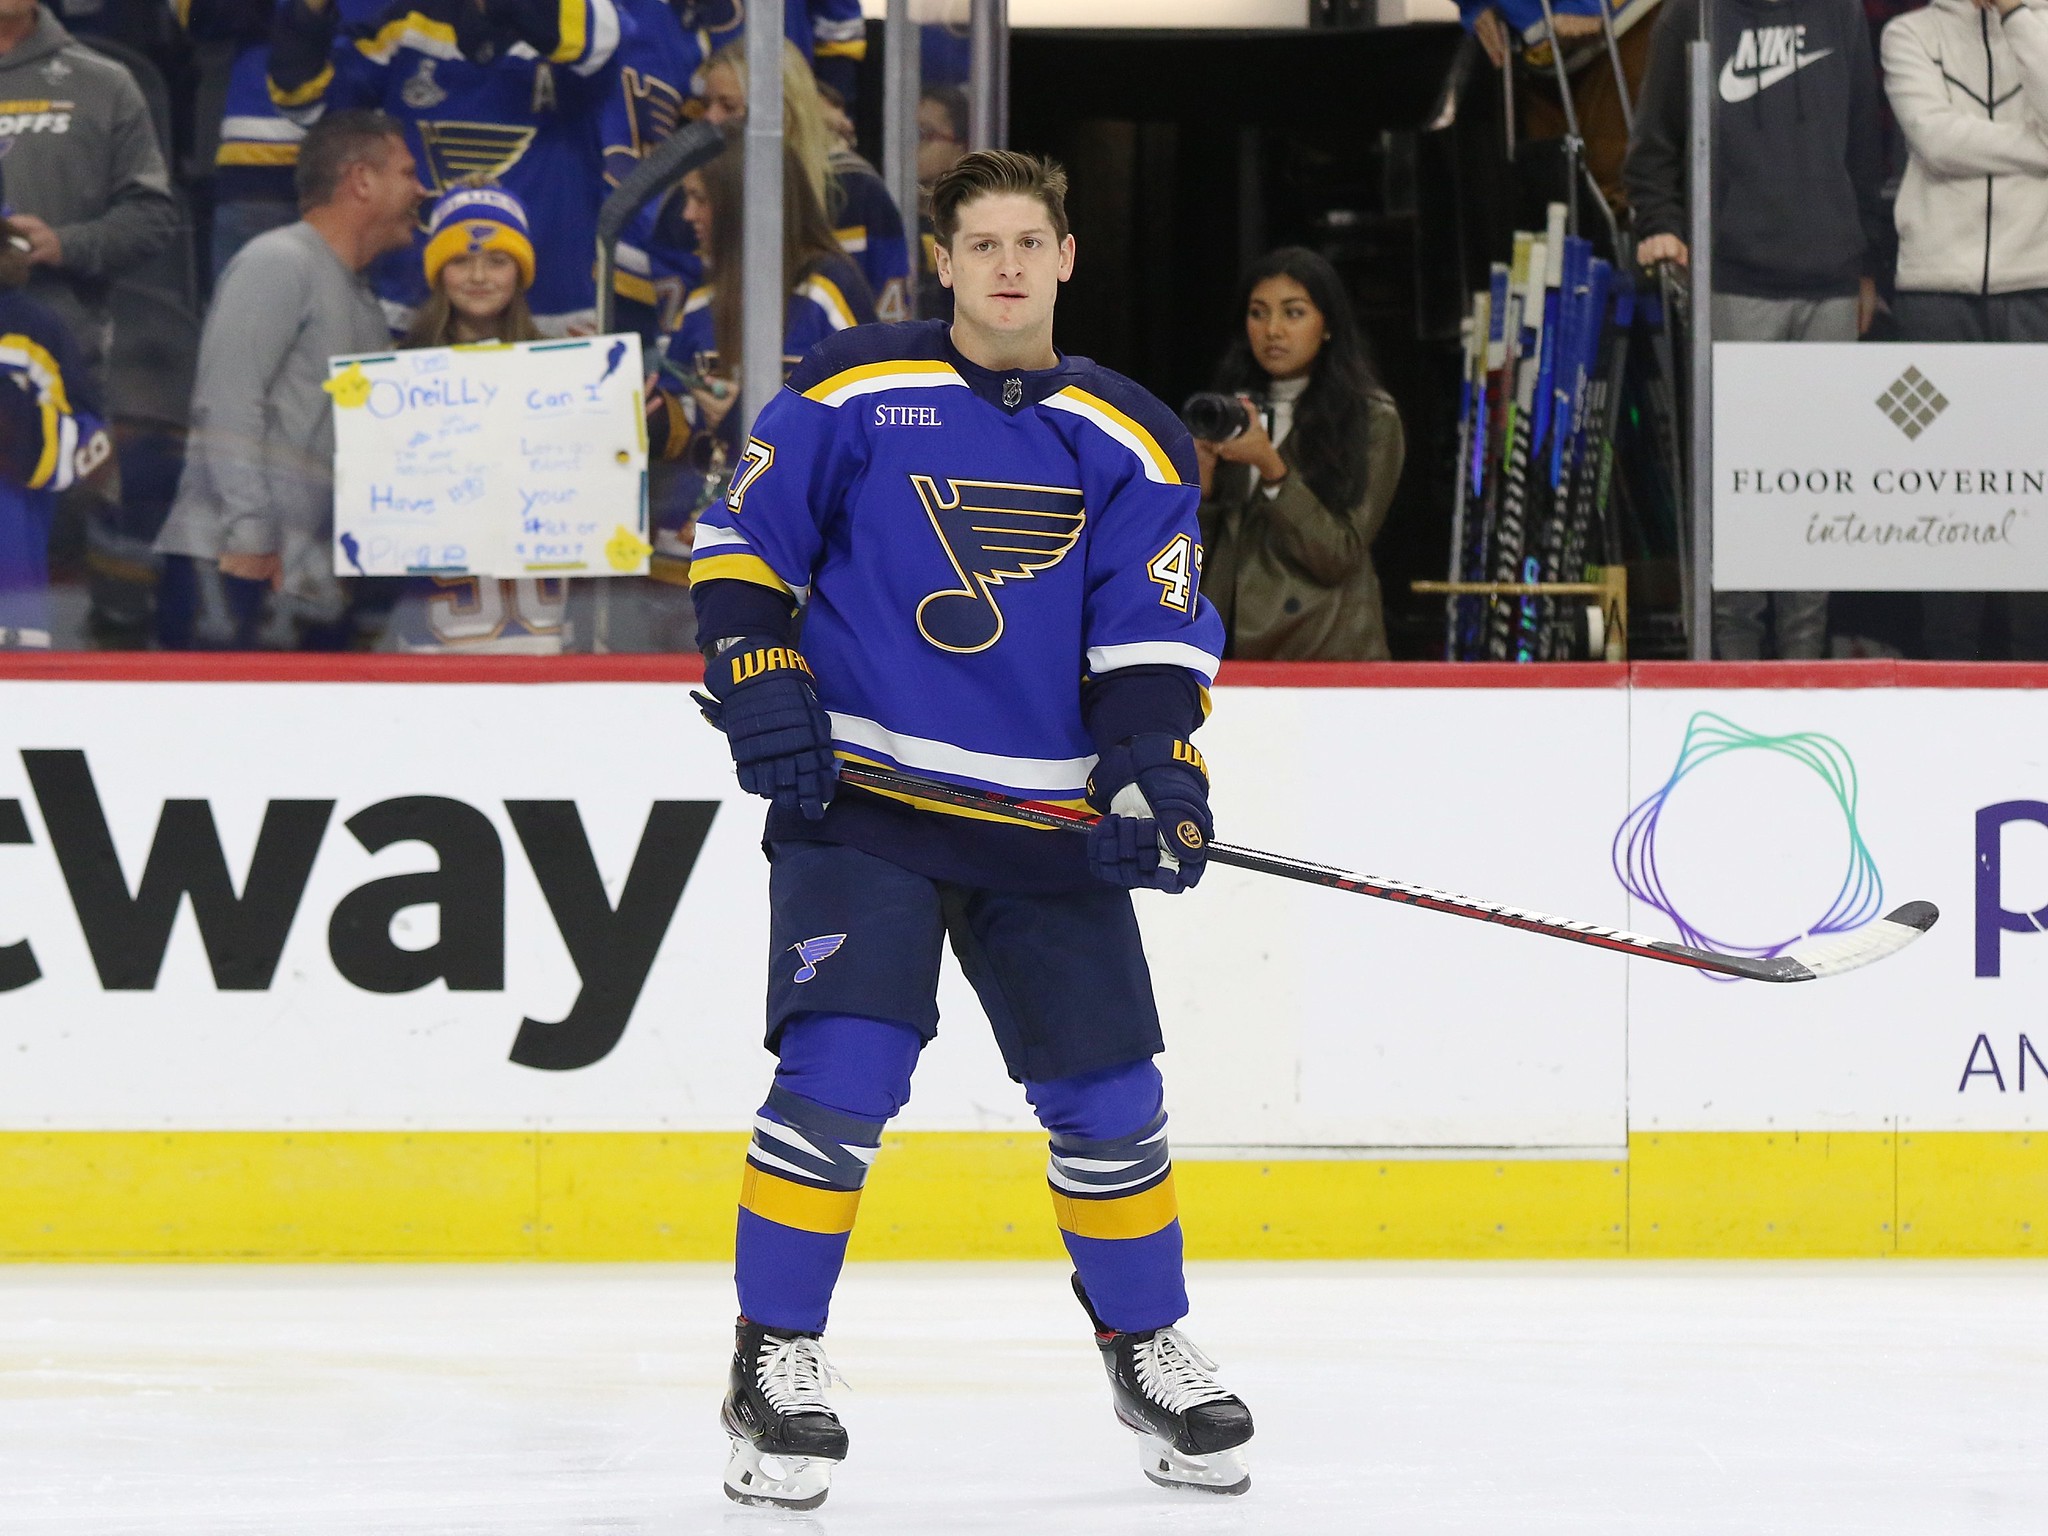 Torey Krug Is Injured! What Does This Mean For The St. Louis Blues? 